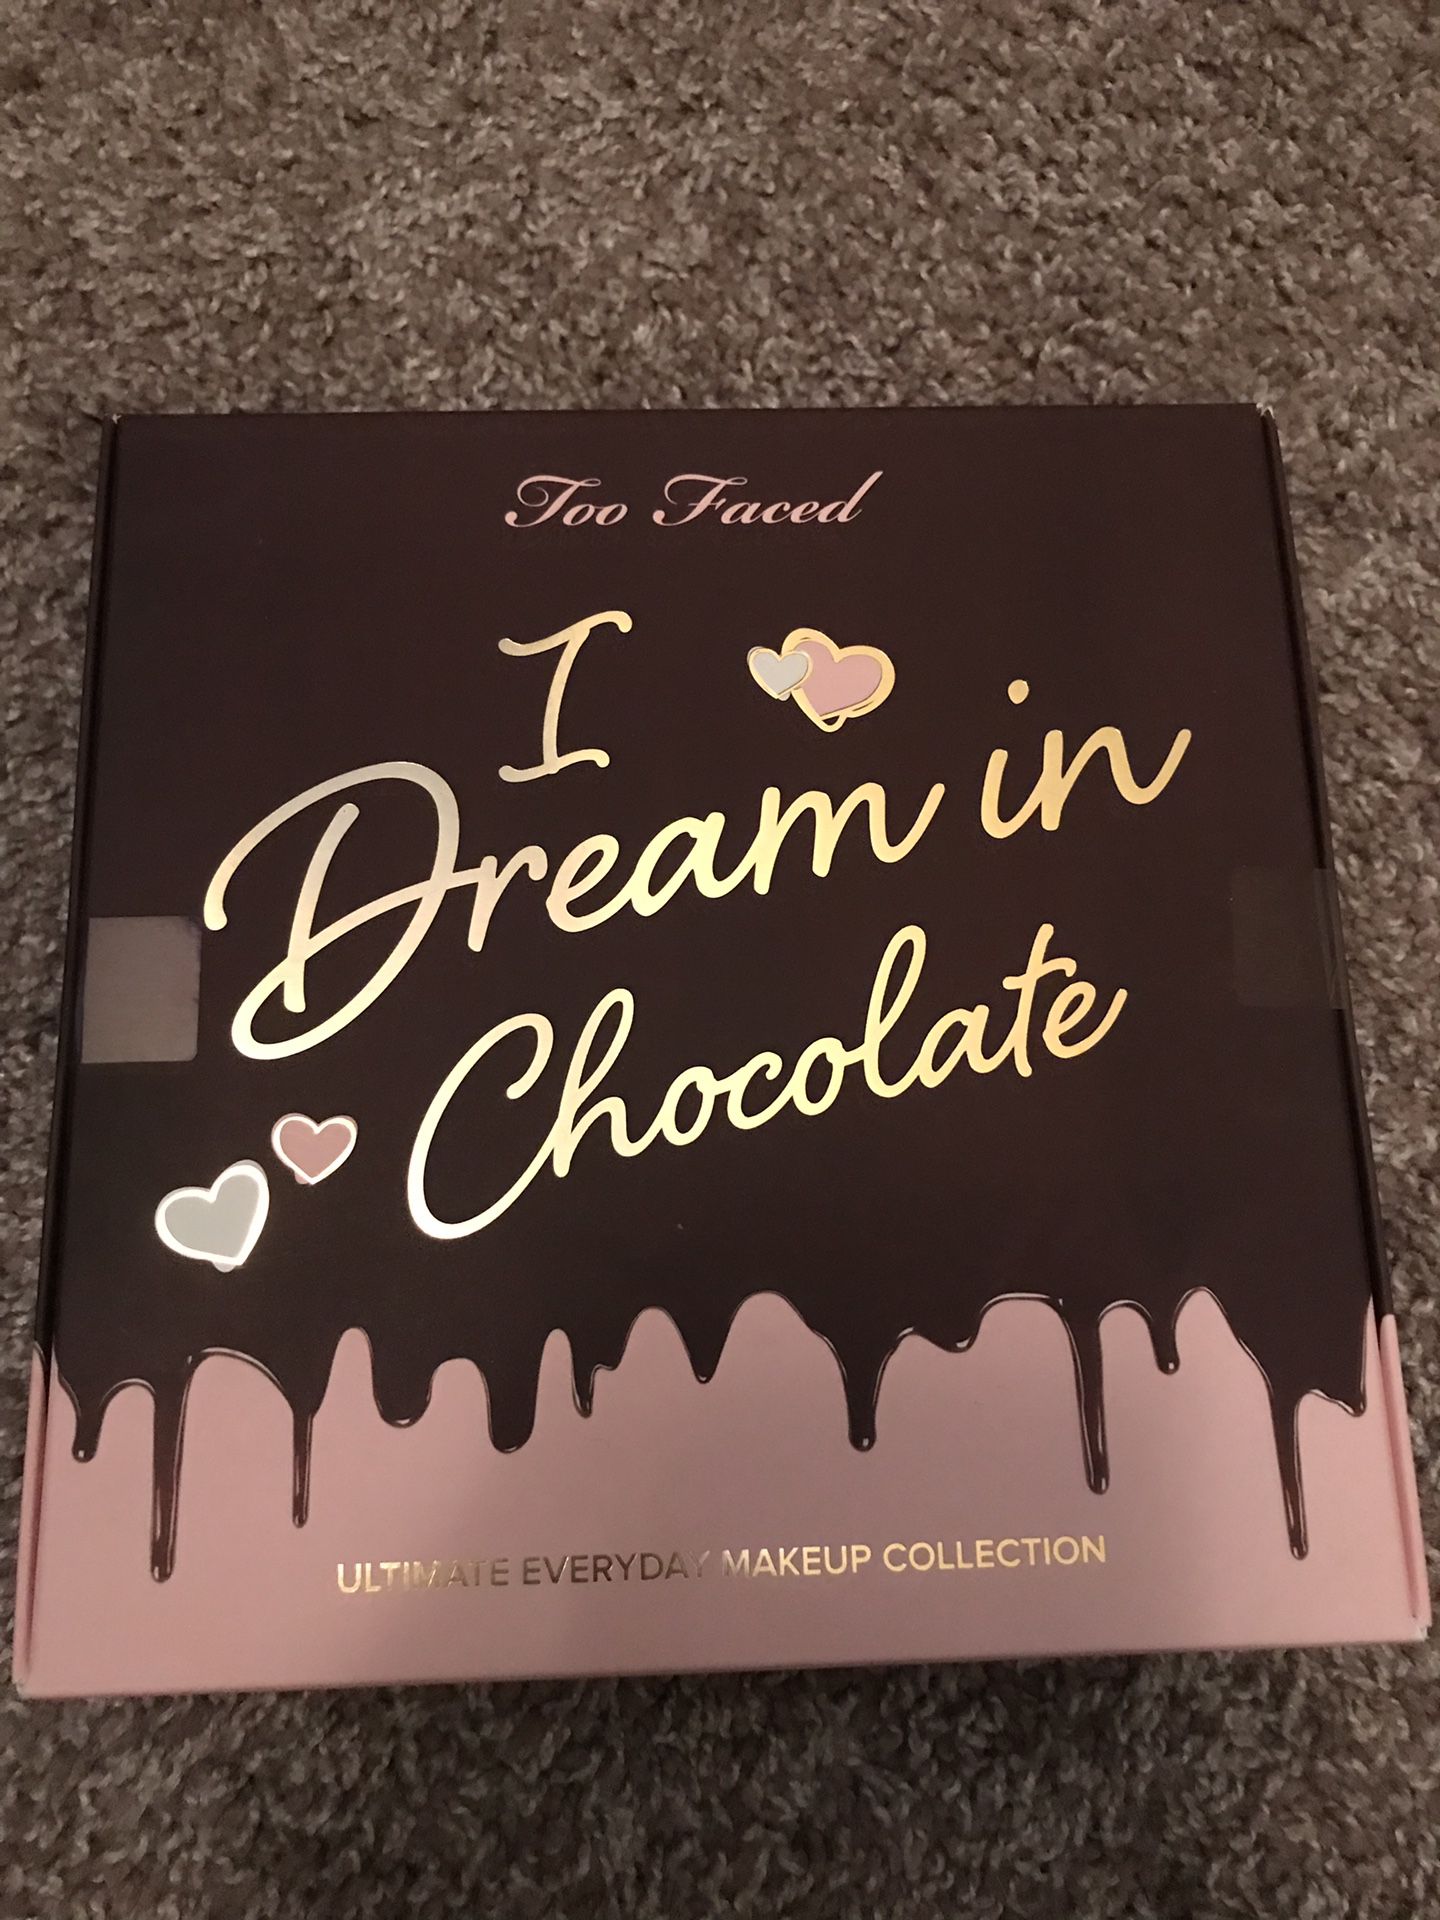 Too faced makeup set ‘I dream in chocolate’